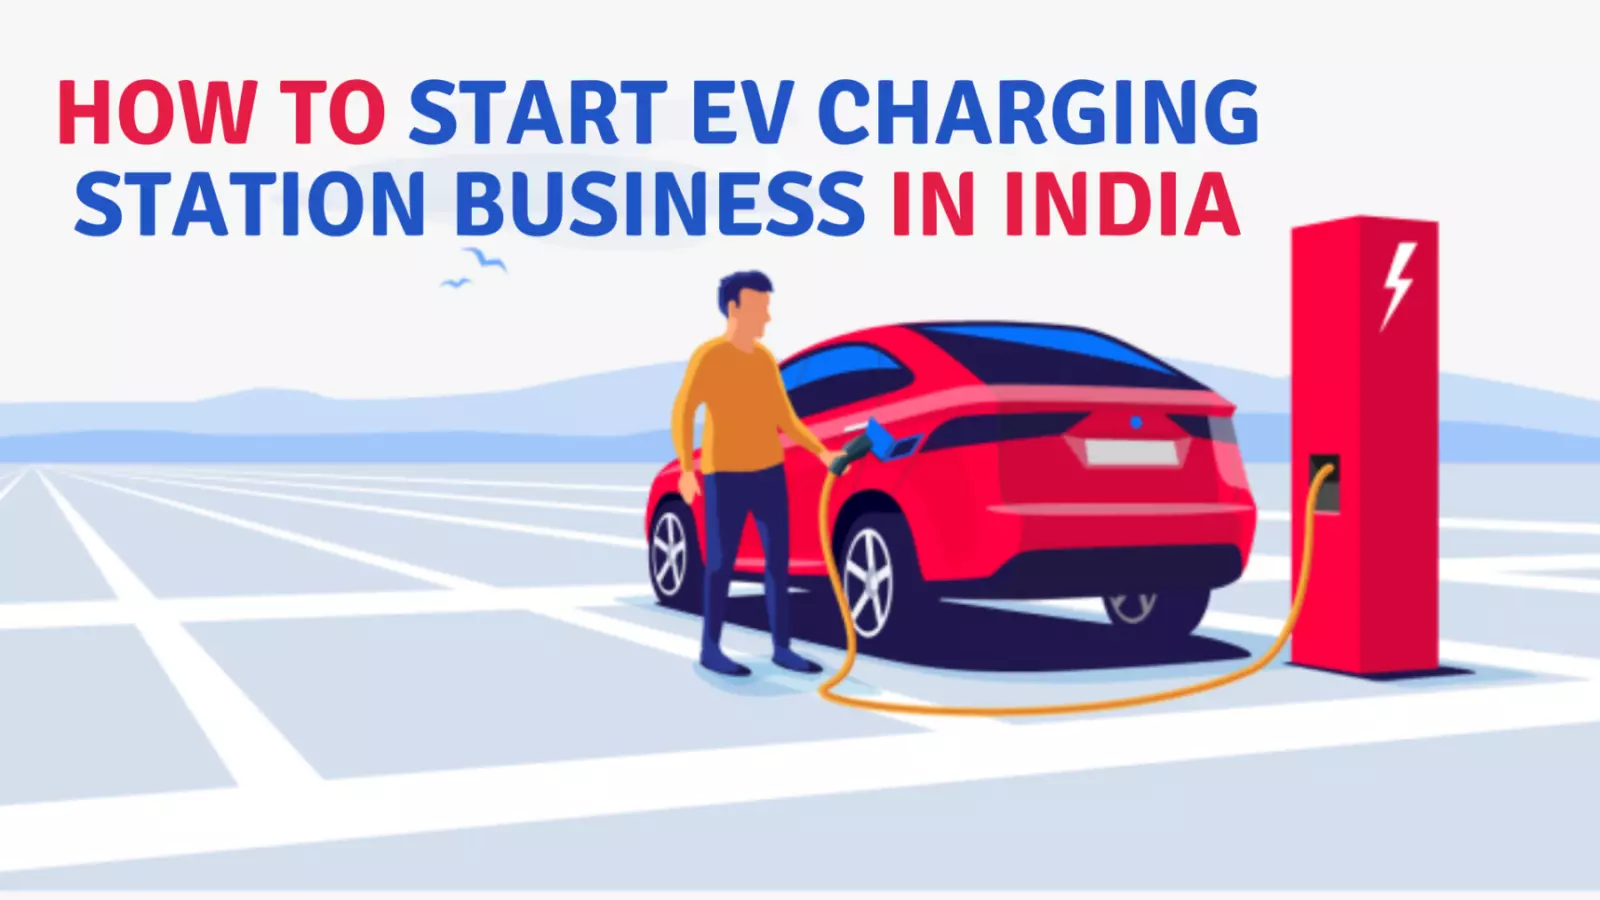 https://e-vehicleinfo.com/how-to-start-ev-charging-station-business-in-india/